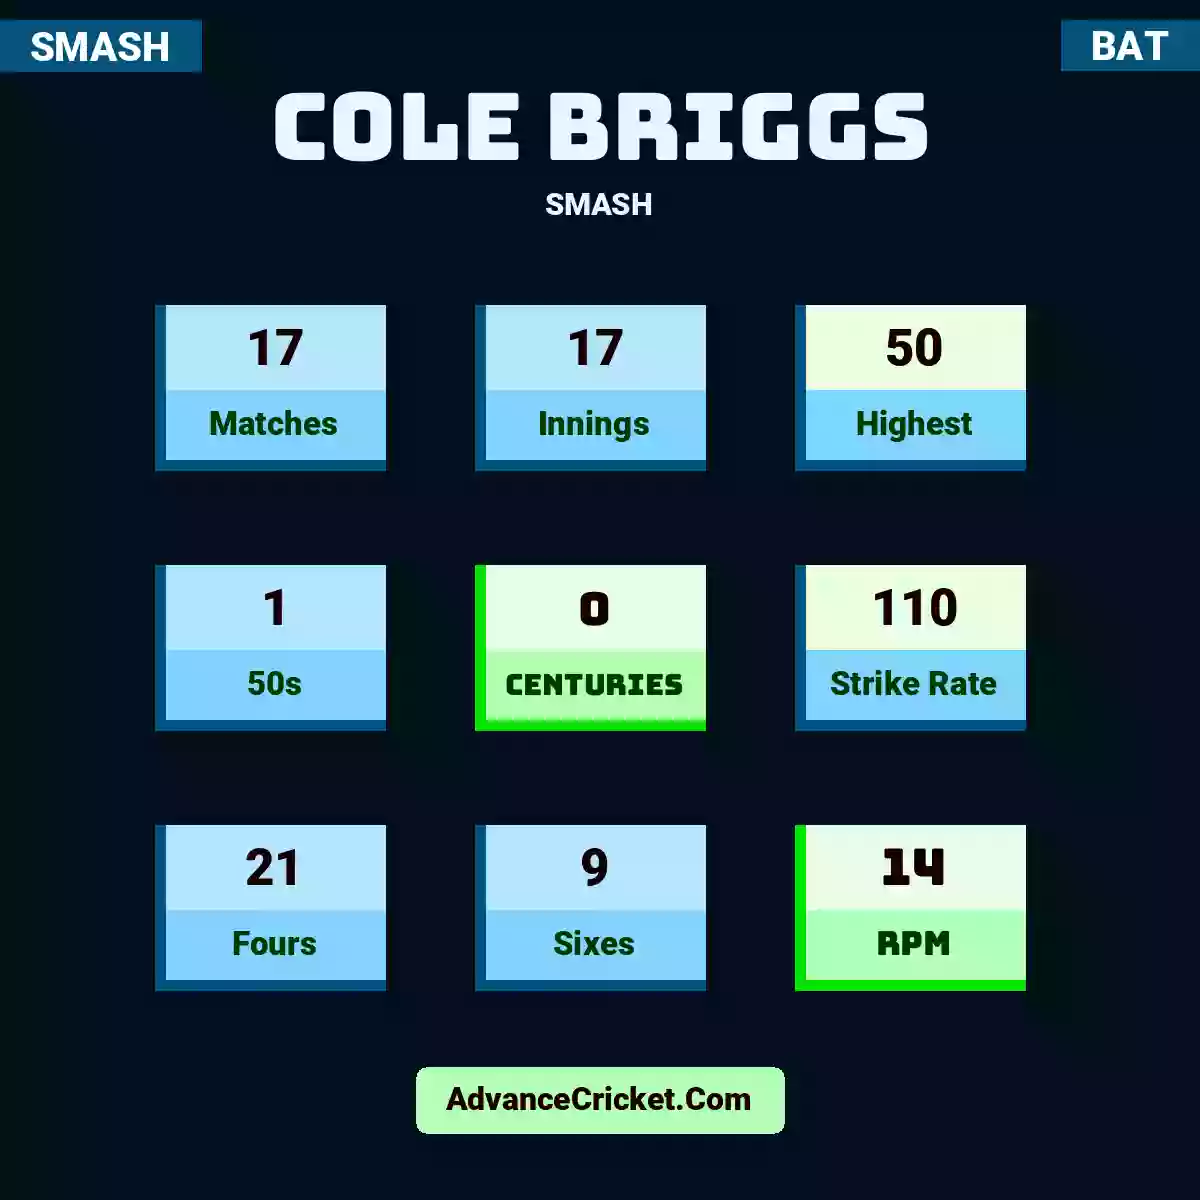 Cole Briggs SMASH , Cole Briggs played 17 matches, scored 50 runs as highest, 1 half-centuries, and 0 centuries, with a strike rate of 110. C.Briggs hit 21 fours and 9 sixes, with an RPM of 14.